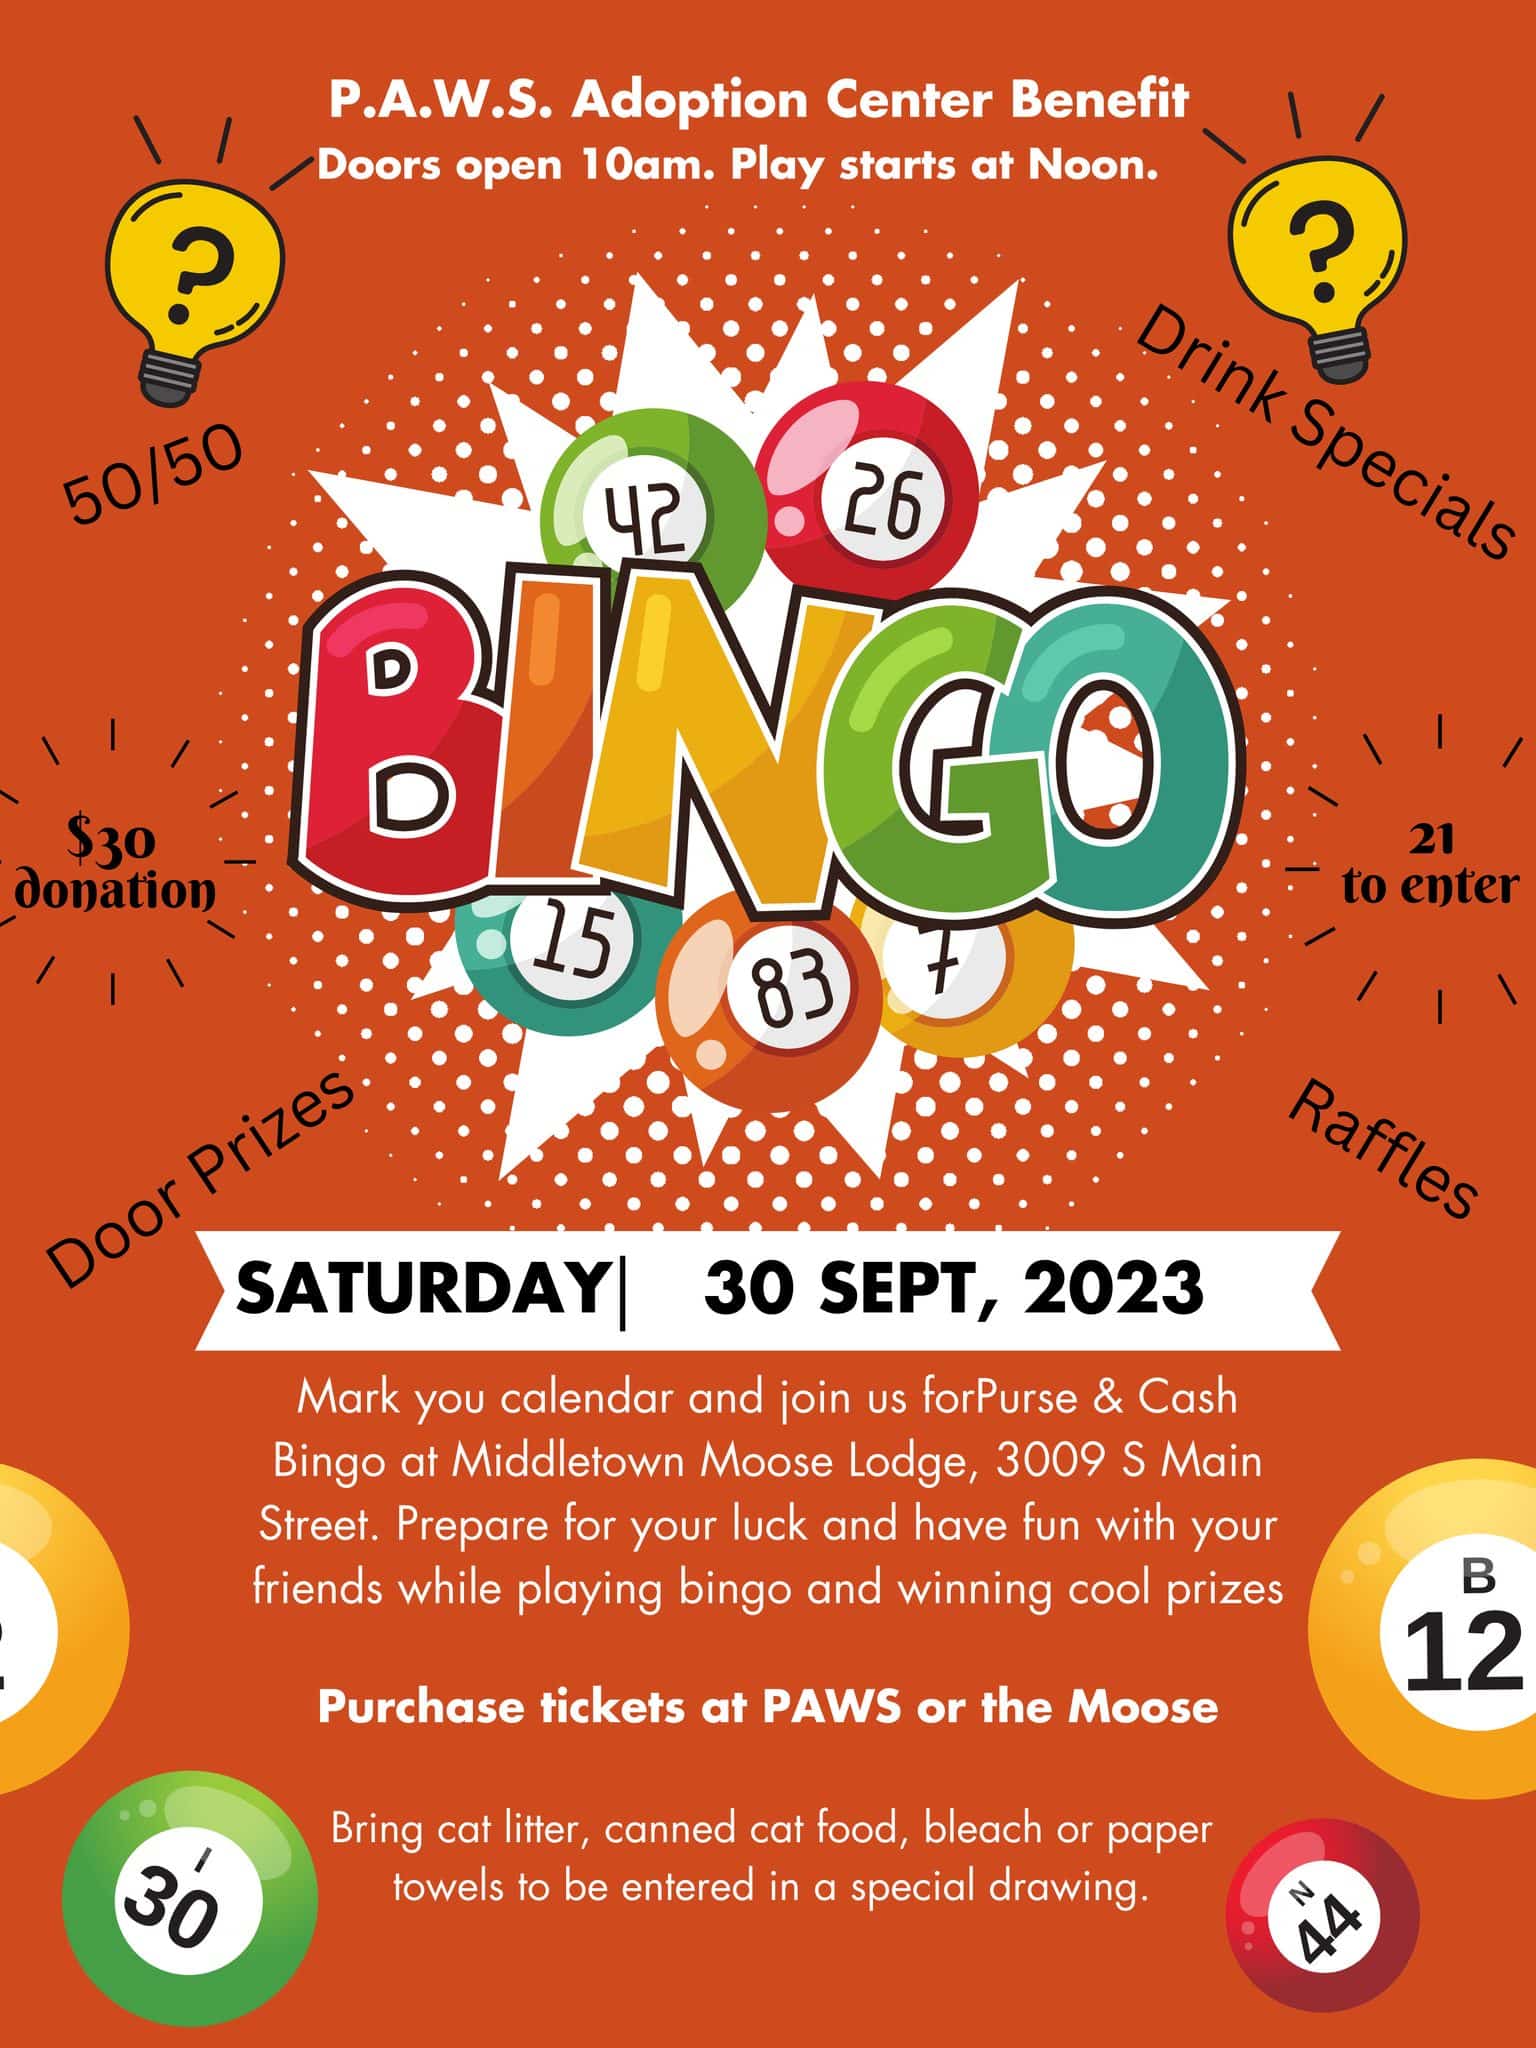 Join us for Purse and Cash Bingo on September 30th at the